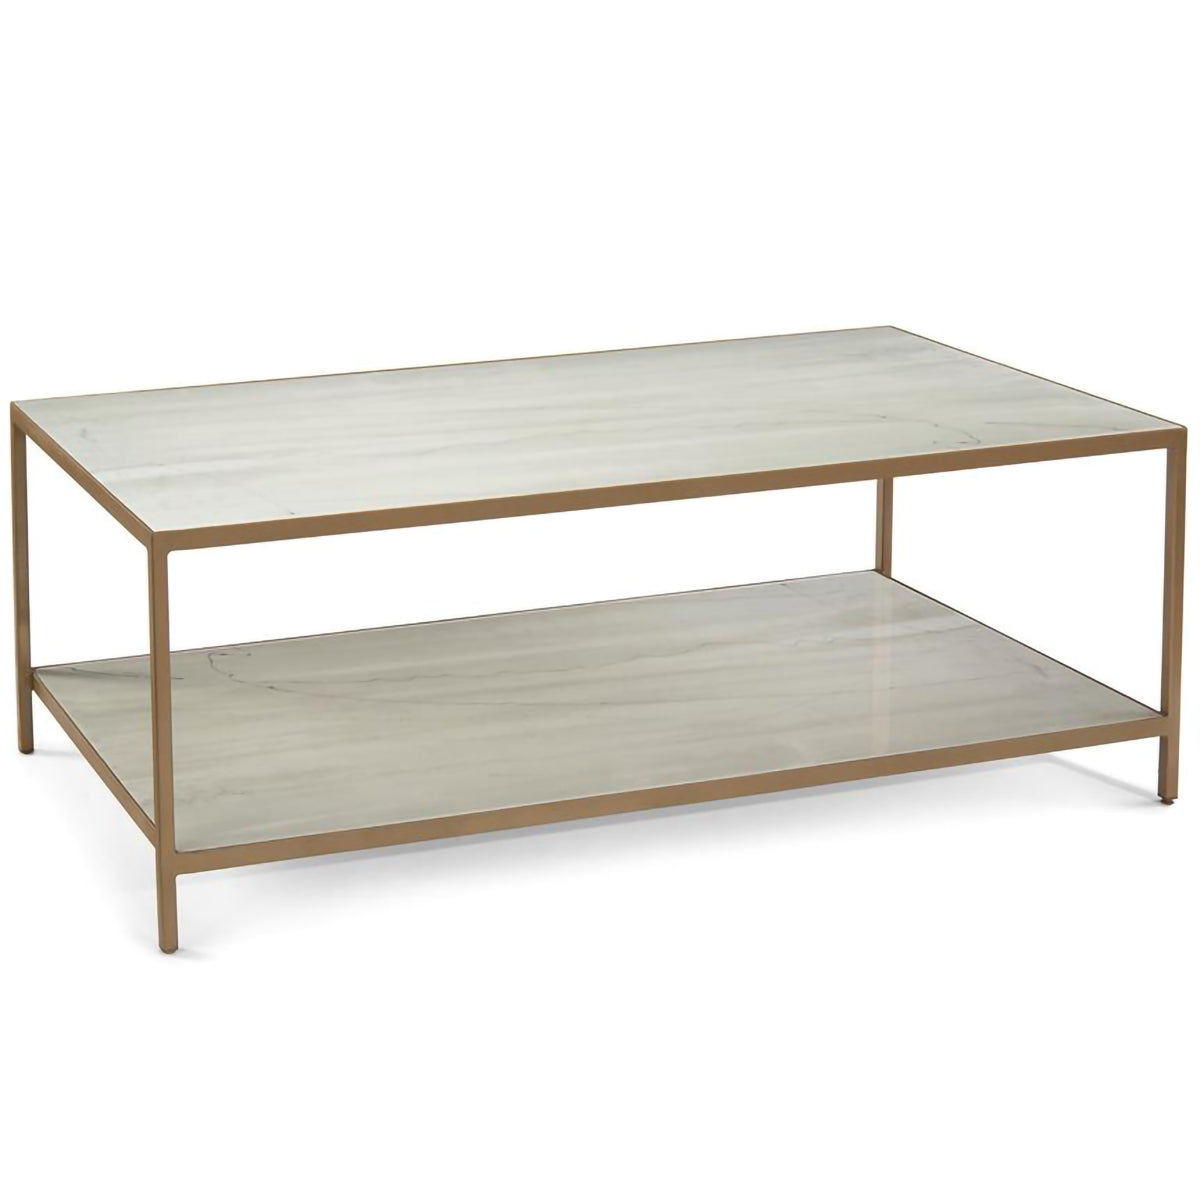 Austin A. James' New Orleans White Gold Coffee Table with Shelf